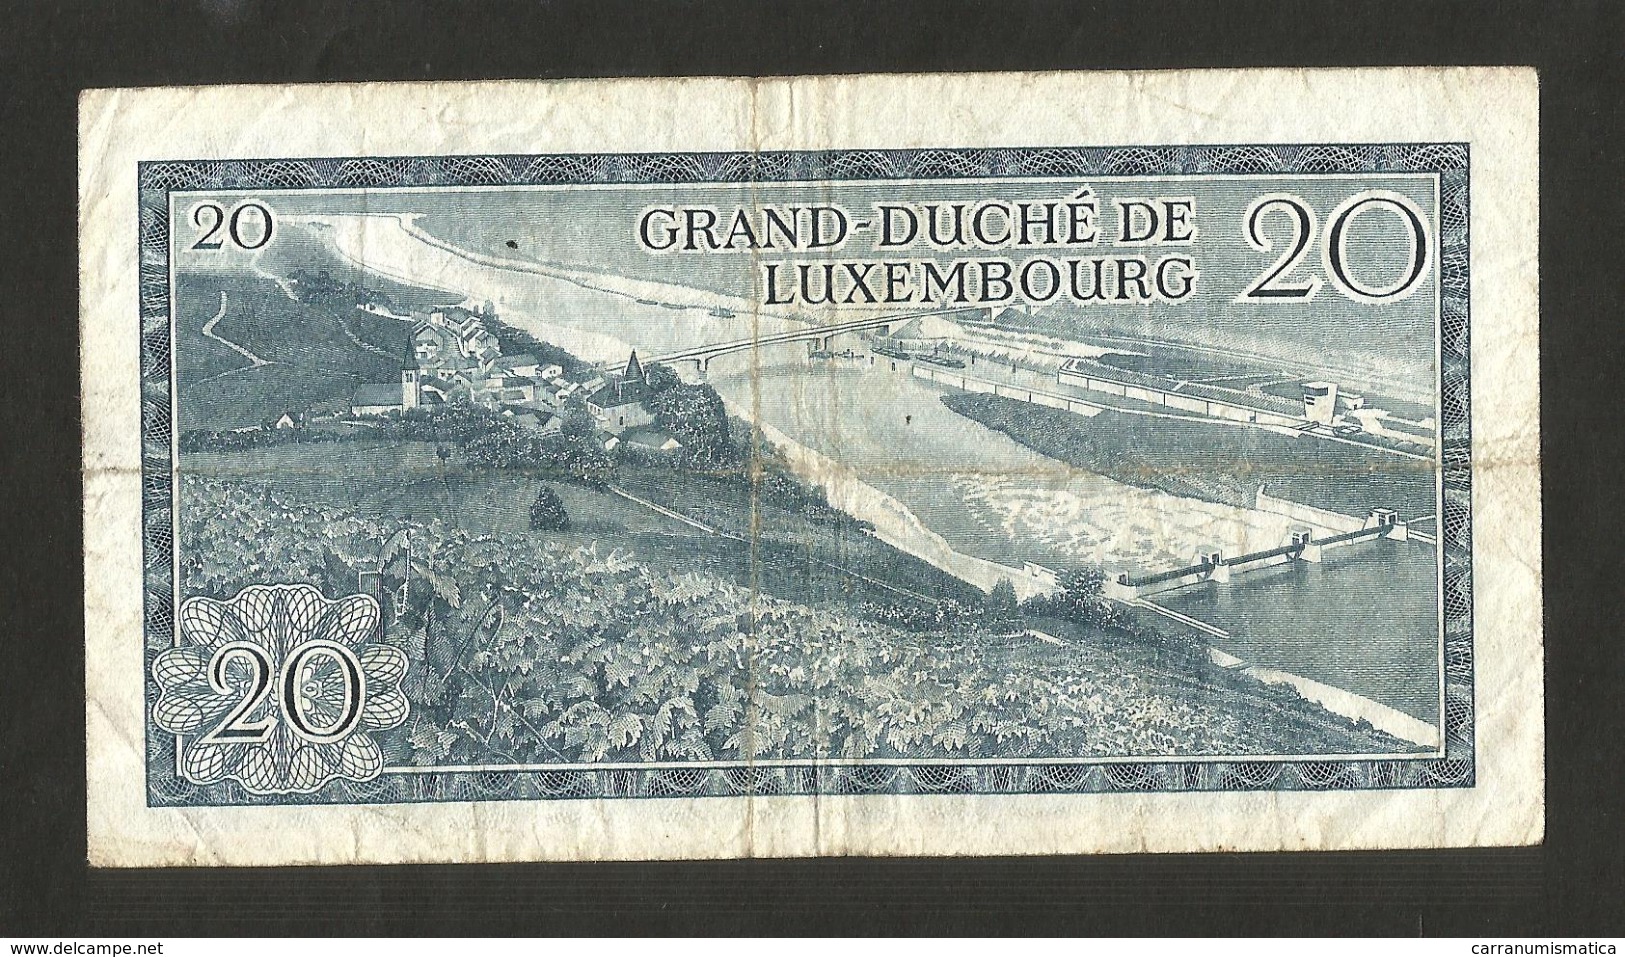 LUXEMBOURG - 20 FRANCS (1966) - Luxembourg